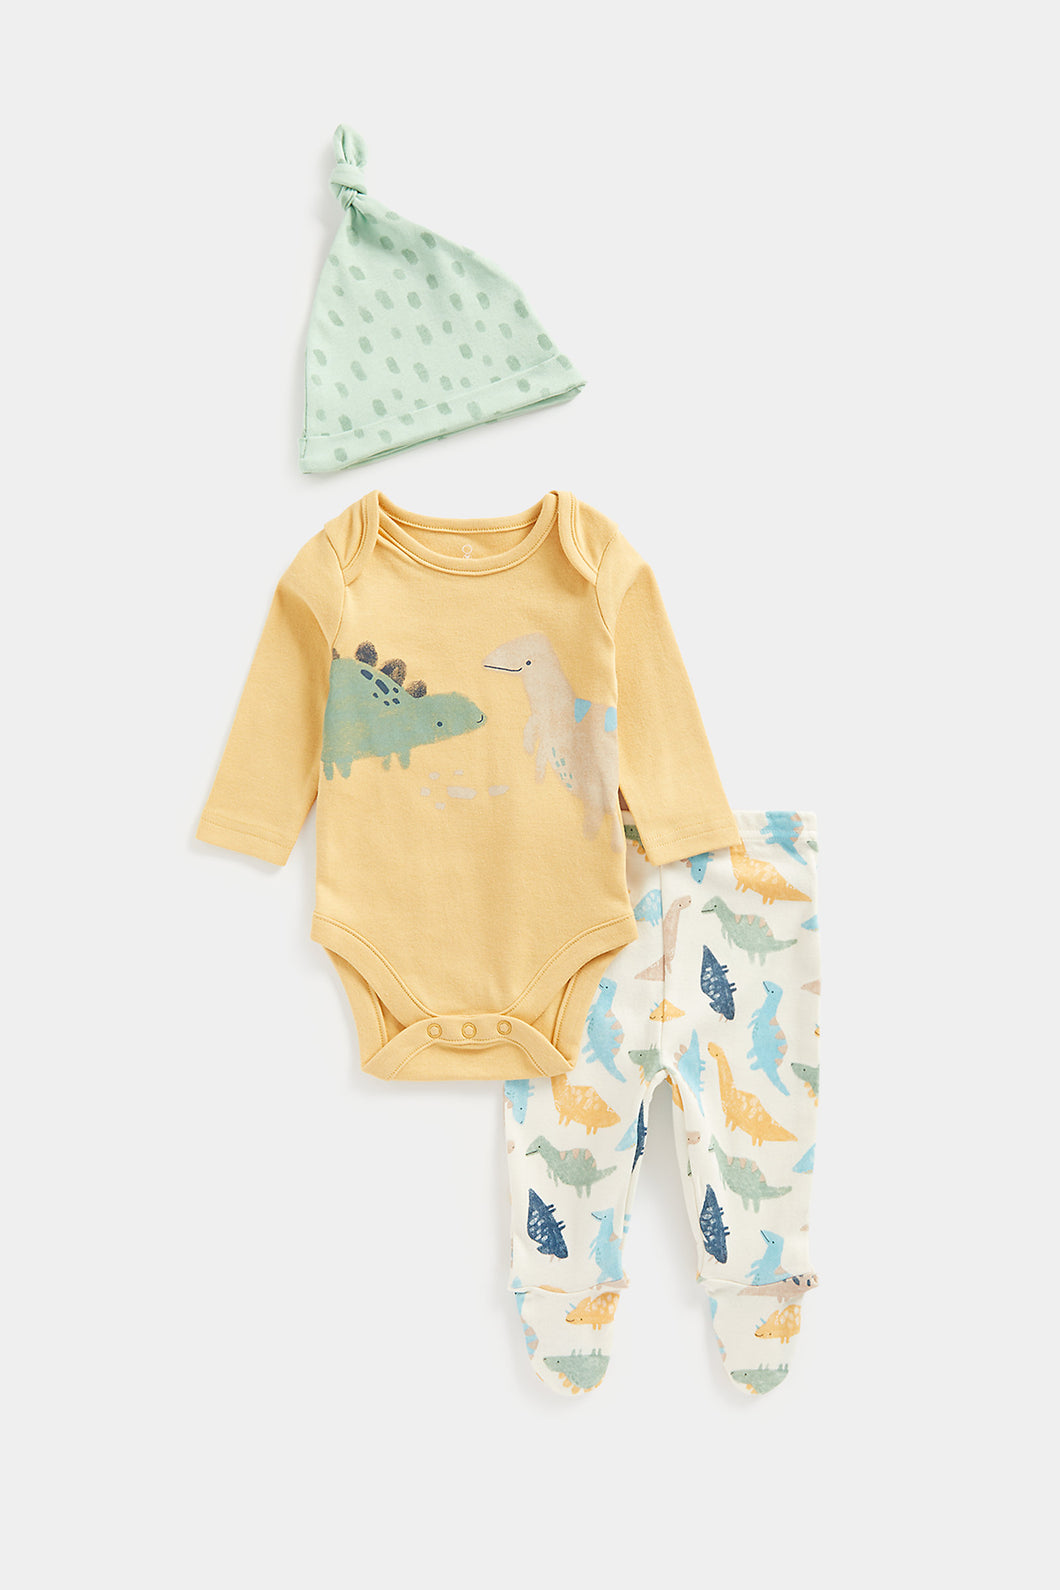 Mothercare Dinosaur 3-Piece Baby Outfit Set